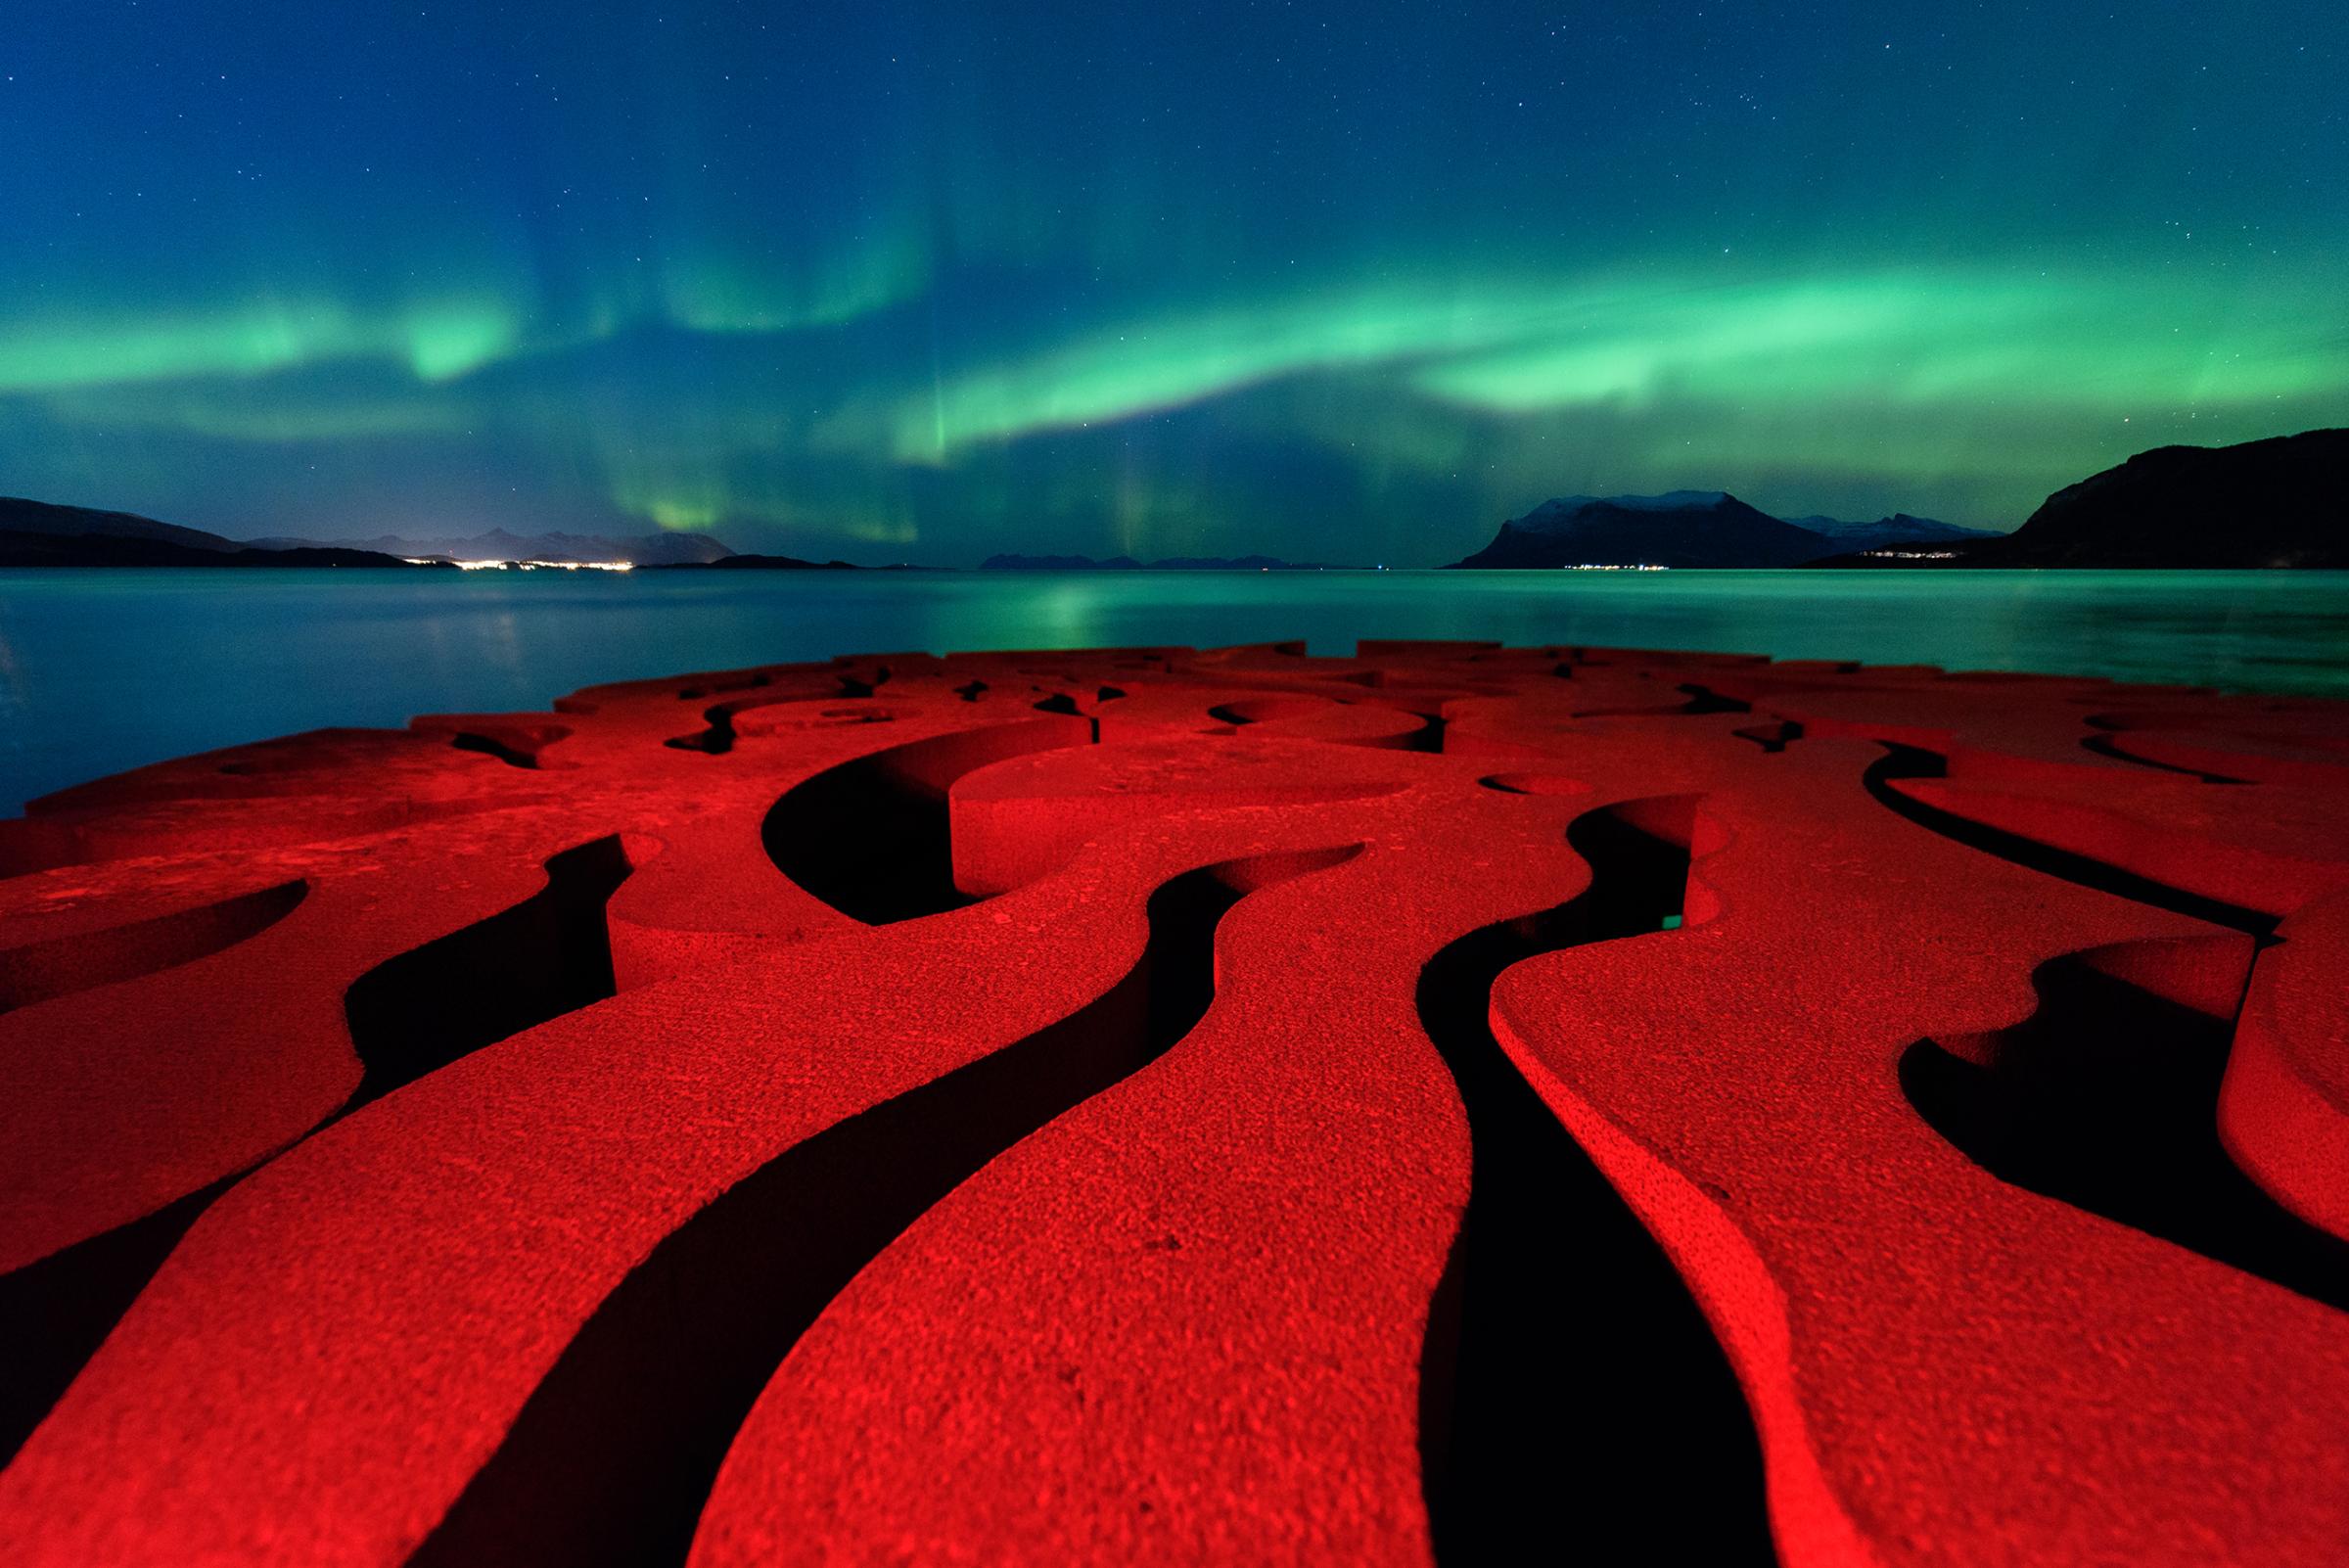 The rusty red swirls of the circular, iron sculpture, Seven Magic Points, in Brattebergan, Norway, mirror the rippling aurora above.